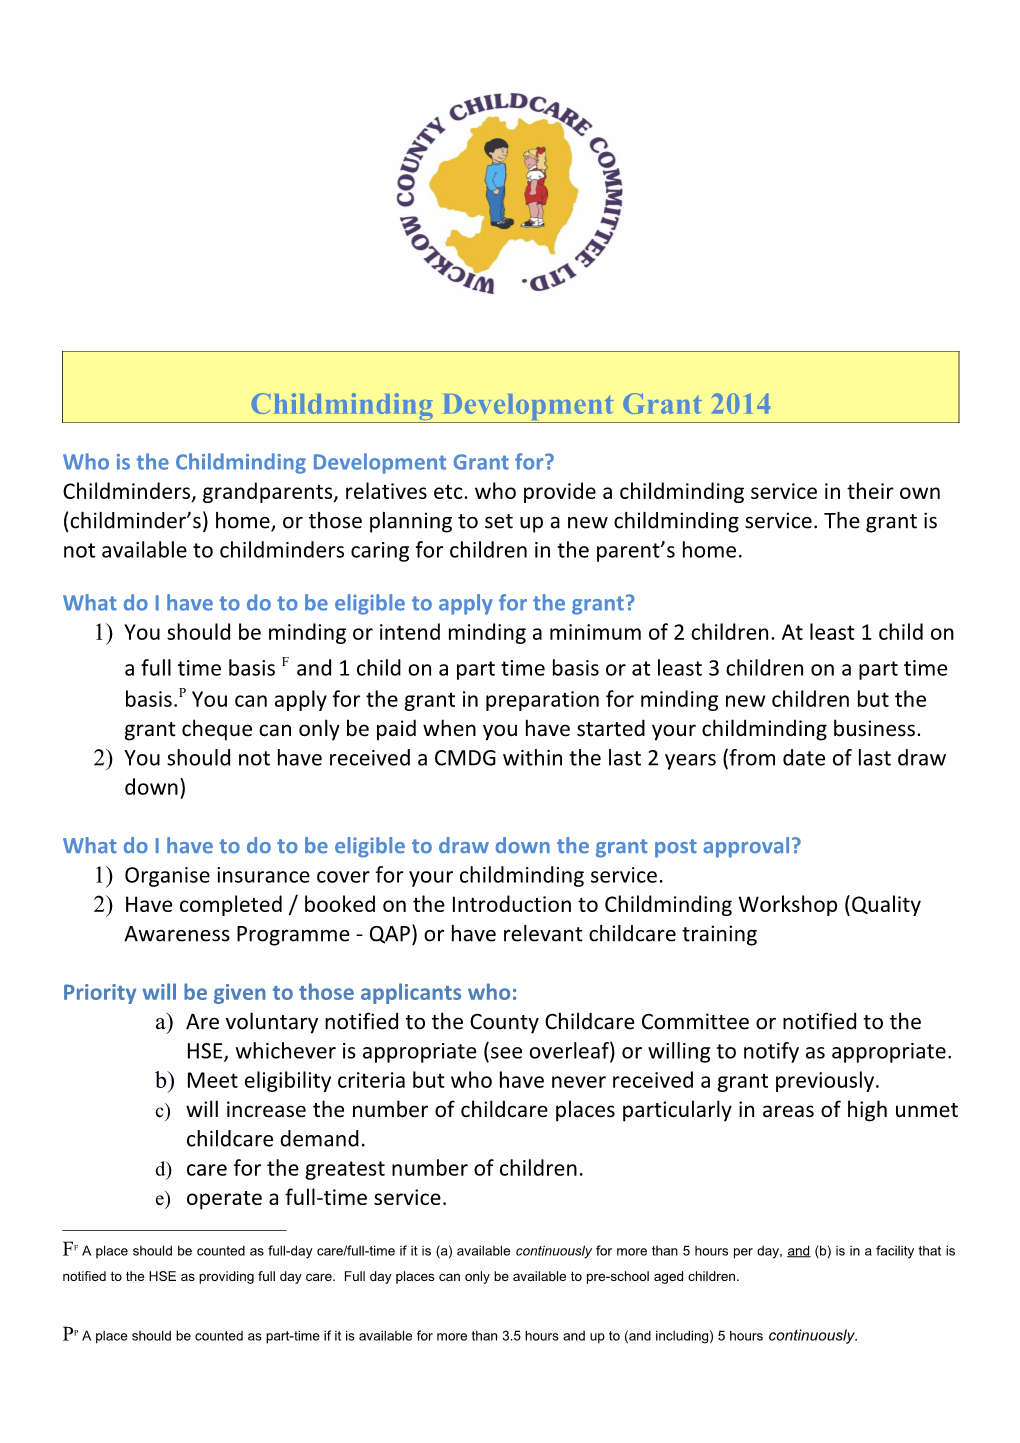 Who Is the Childminding Development Grant For?